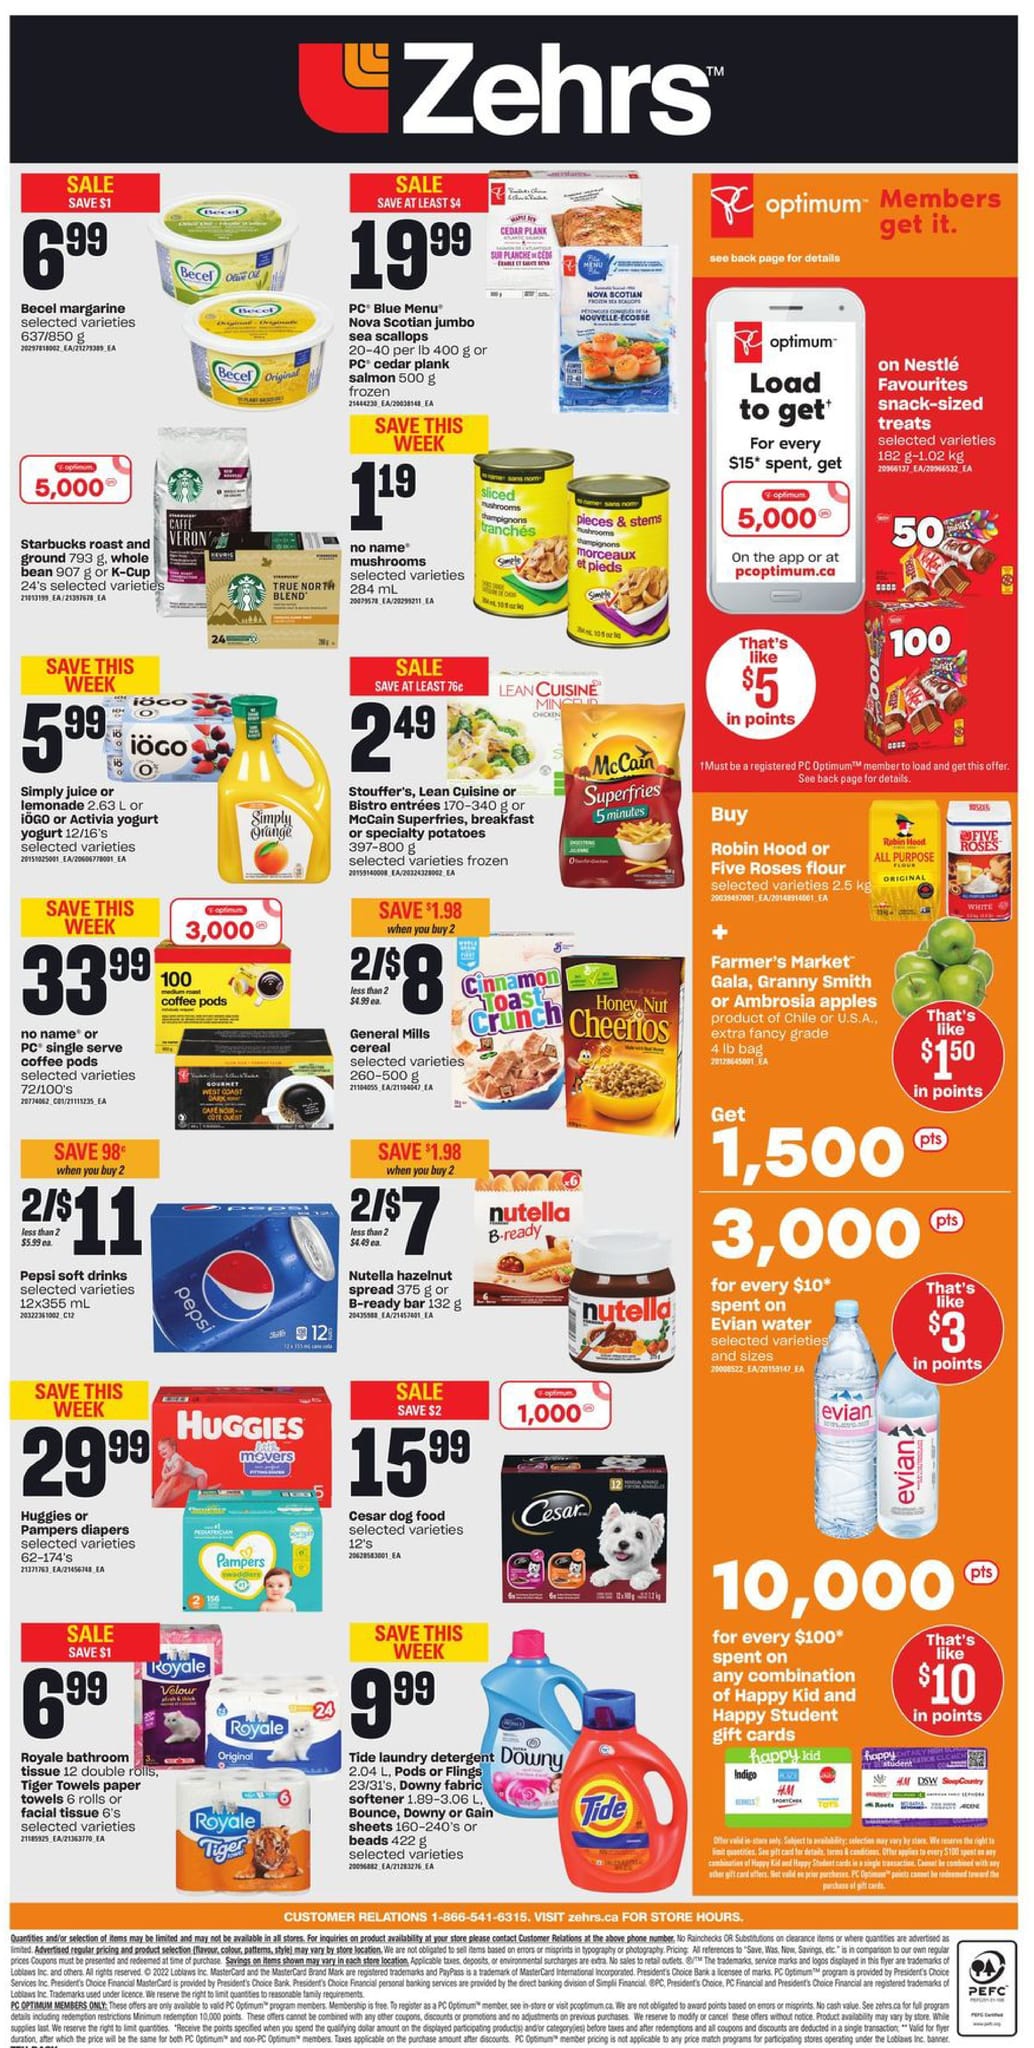 Zehrs - Weekly Flyer Specials - Page 3